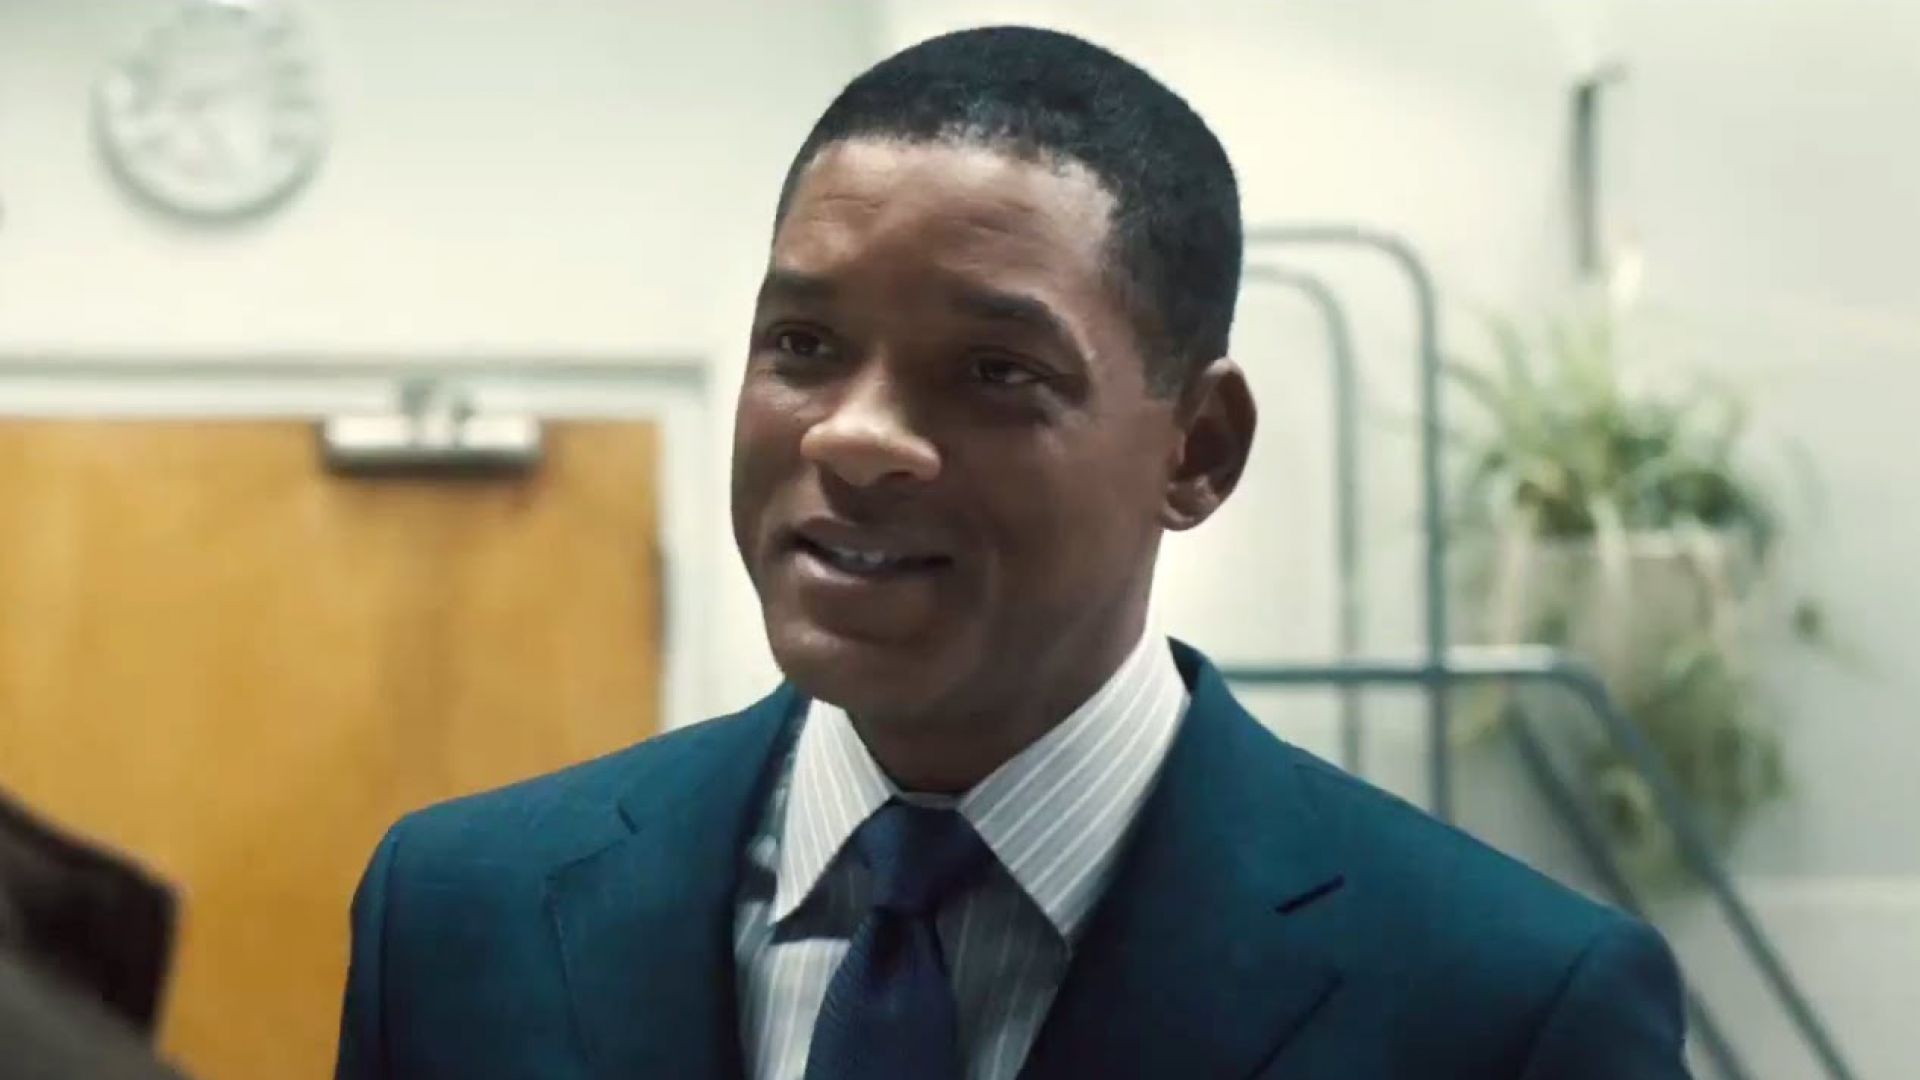 Trailer for Concussion, Starring Will Smith